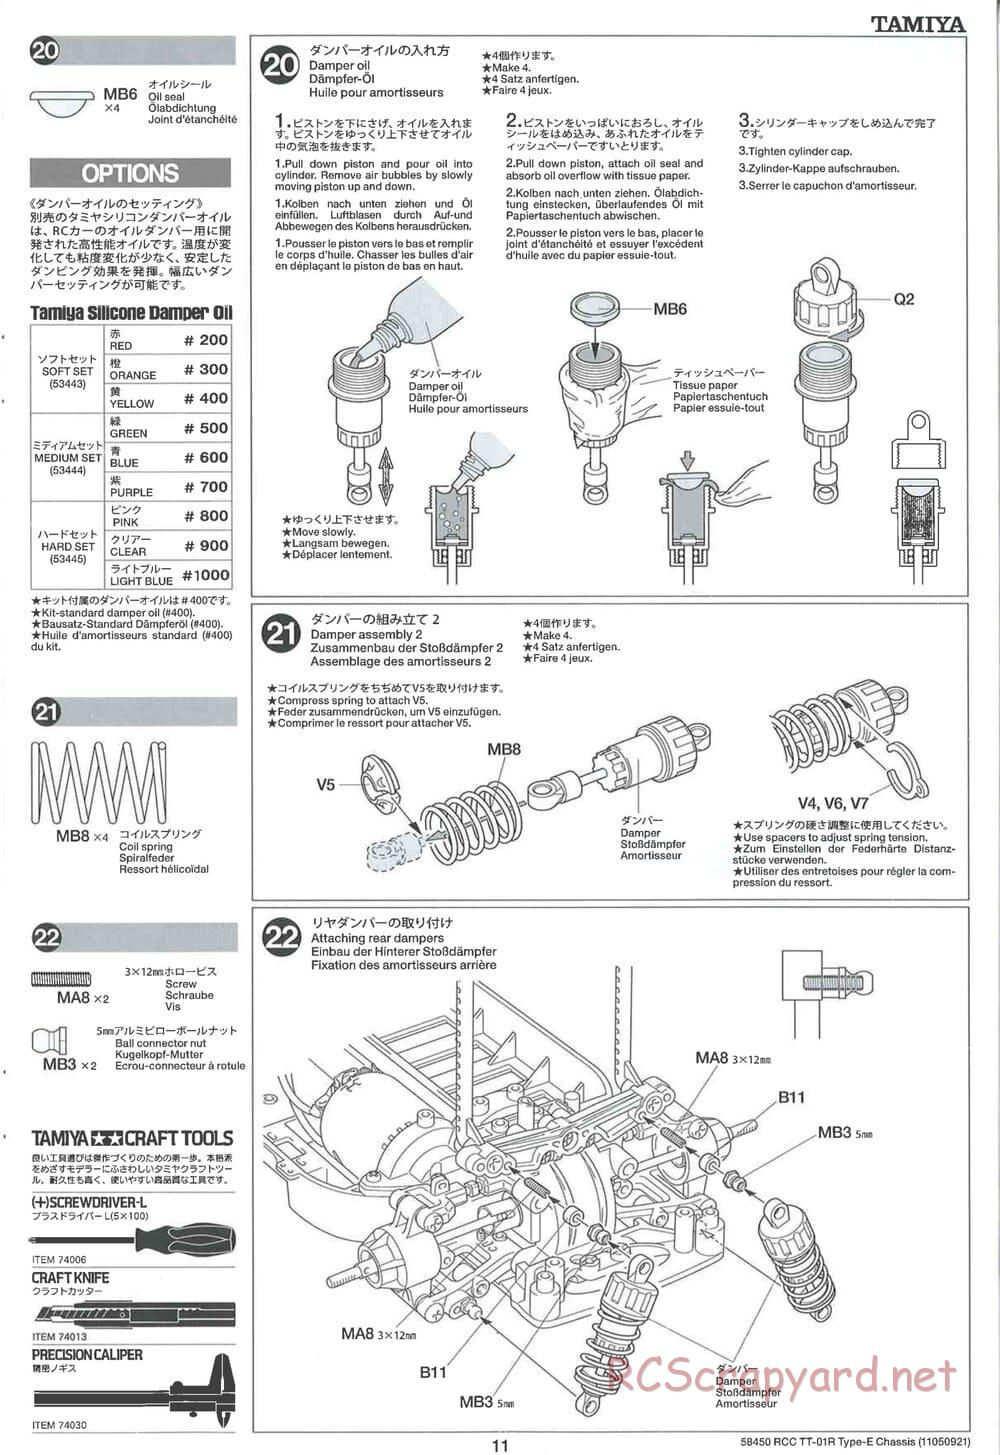 Tamiya - TT-01R Type-E Chassis - Manual - Page 11